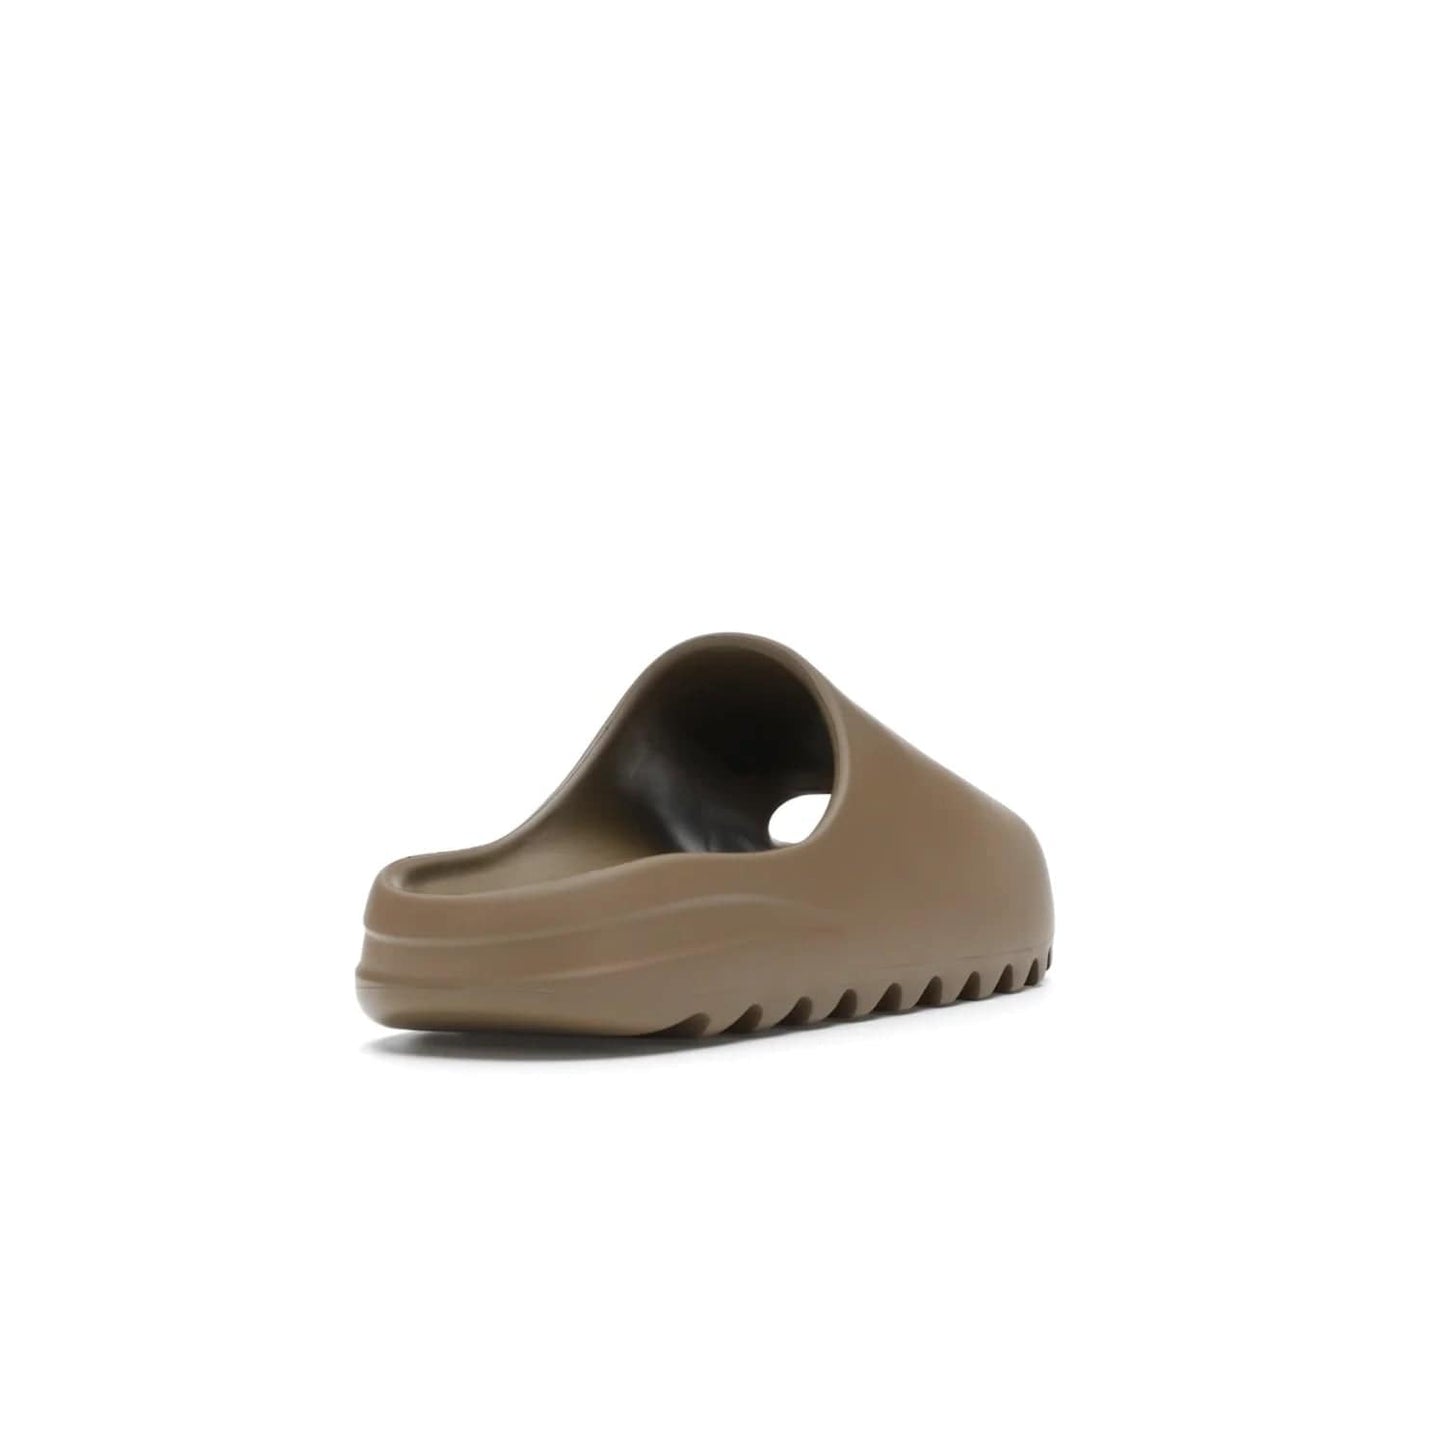 adidas Yeezy Slide Core - Image 31 - Only at www.BallersClubKickz.com - Experience lightweight comfort and cushioning with the adidas Yeezy Slide Core. Features EVA foam upper, soft footbed & grooved outsole for optimal traction & support. The Core/Core/Core colorway released April 2021.